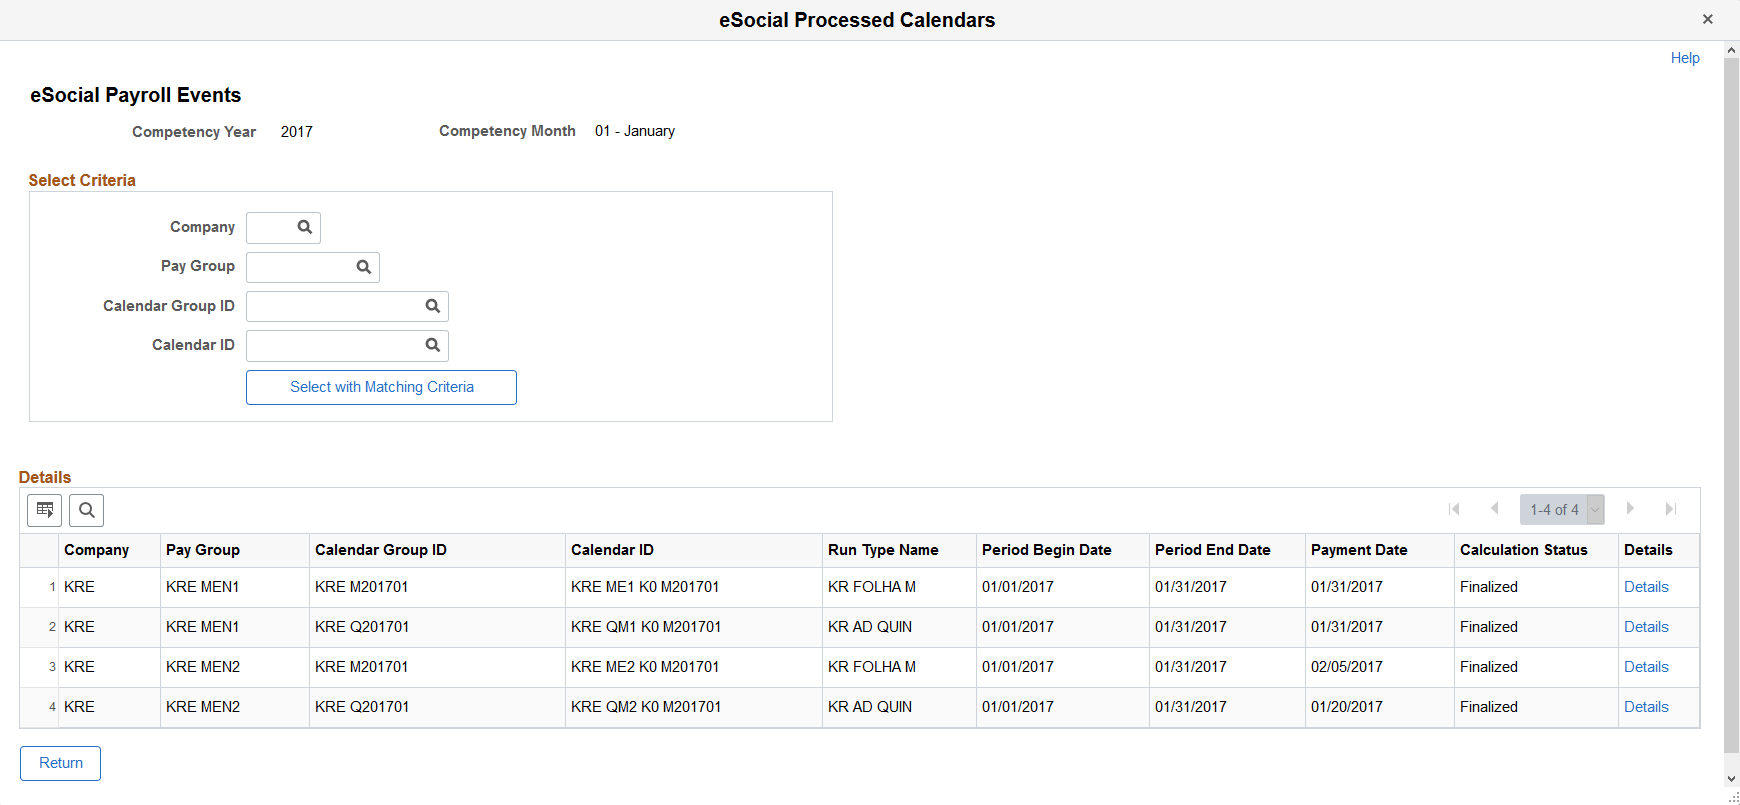 eSocial Processed Calendars - eSocial Payroll Events page